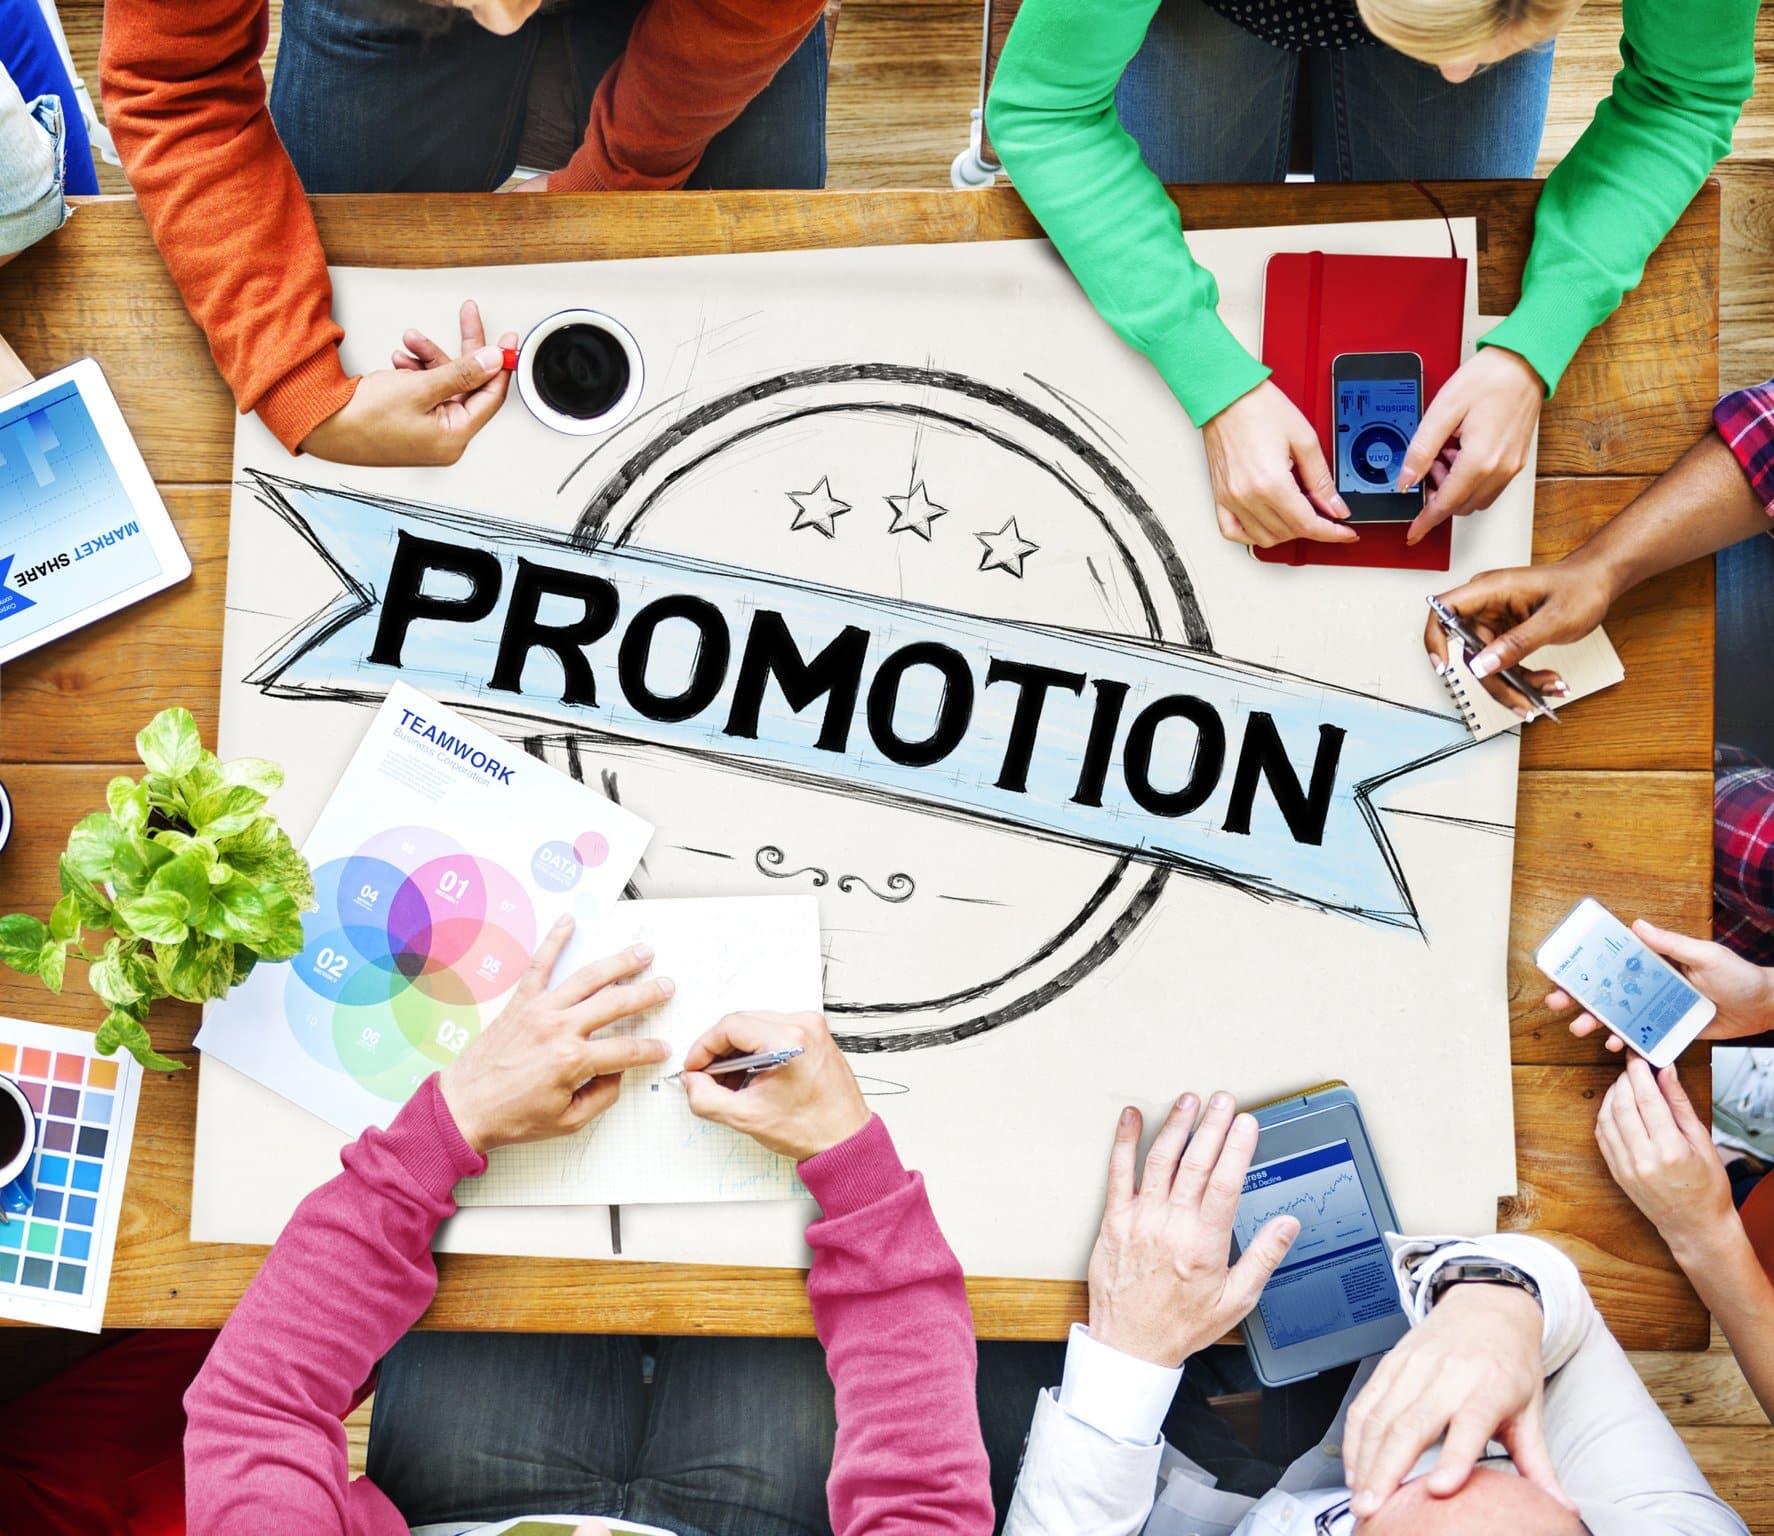 PROMOTIONAL PRODUCTS